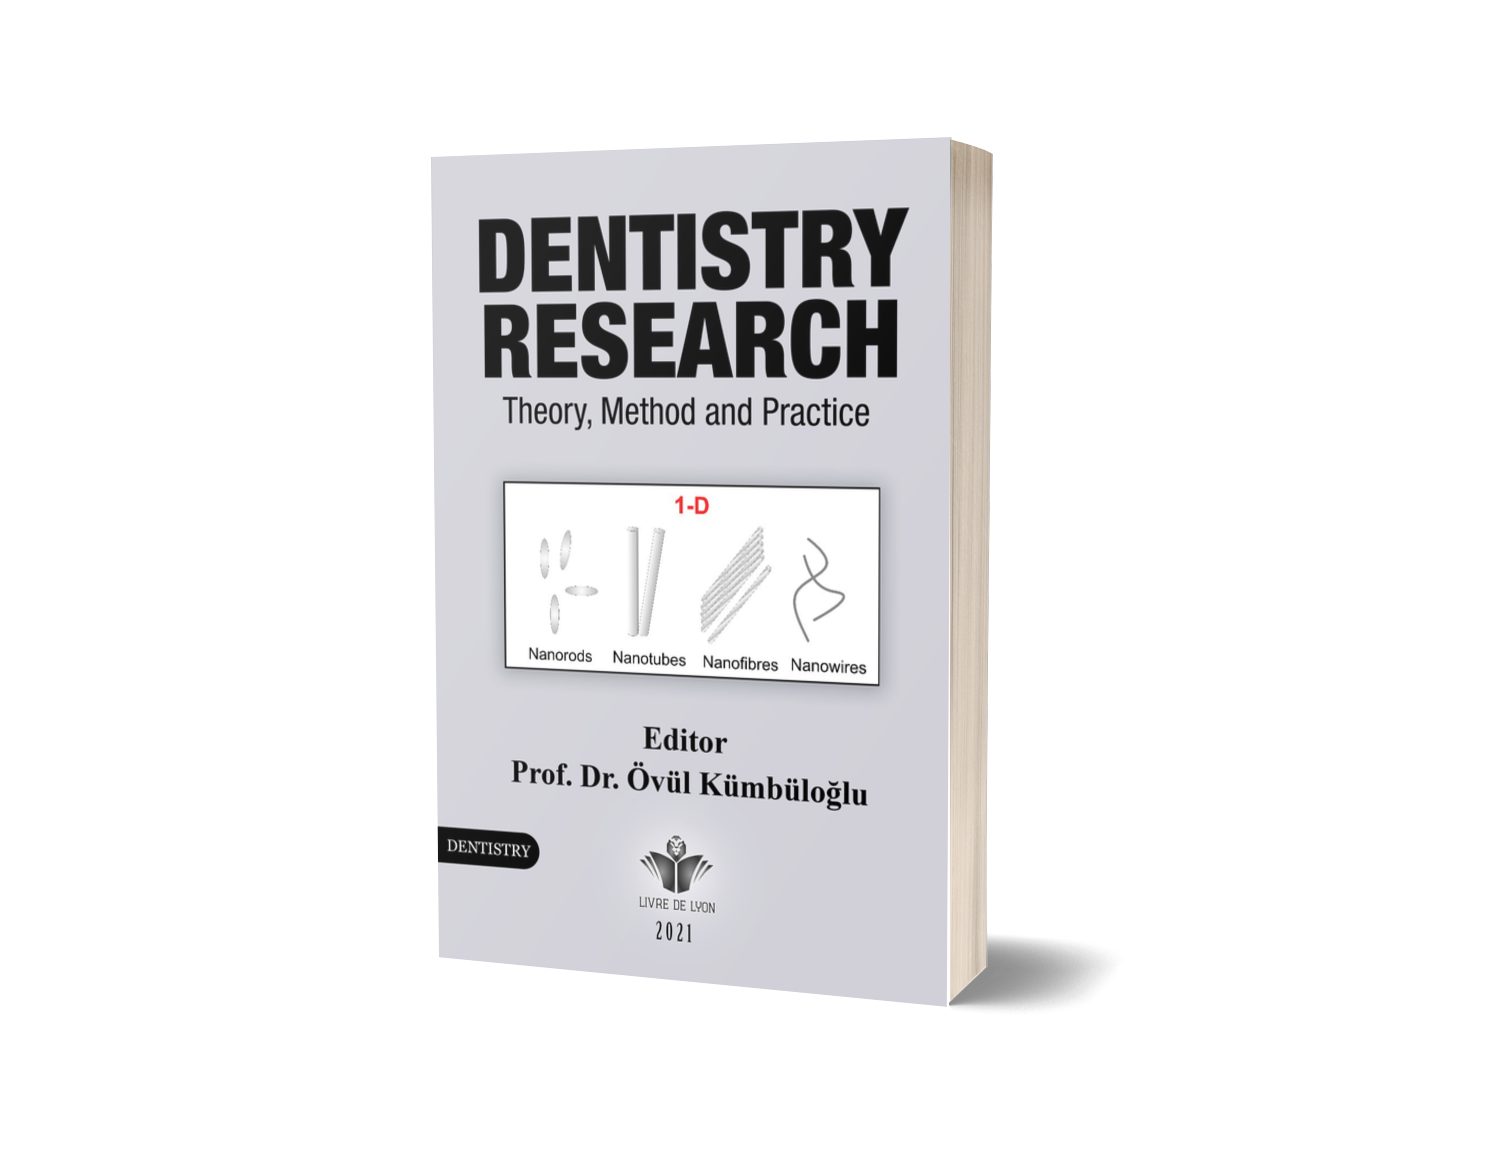 Dentistry Research: Theory, Method and Practice